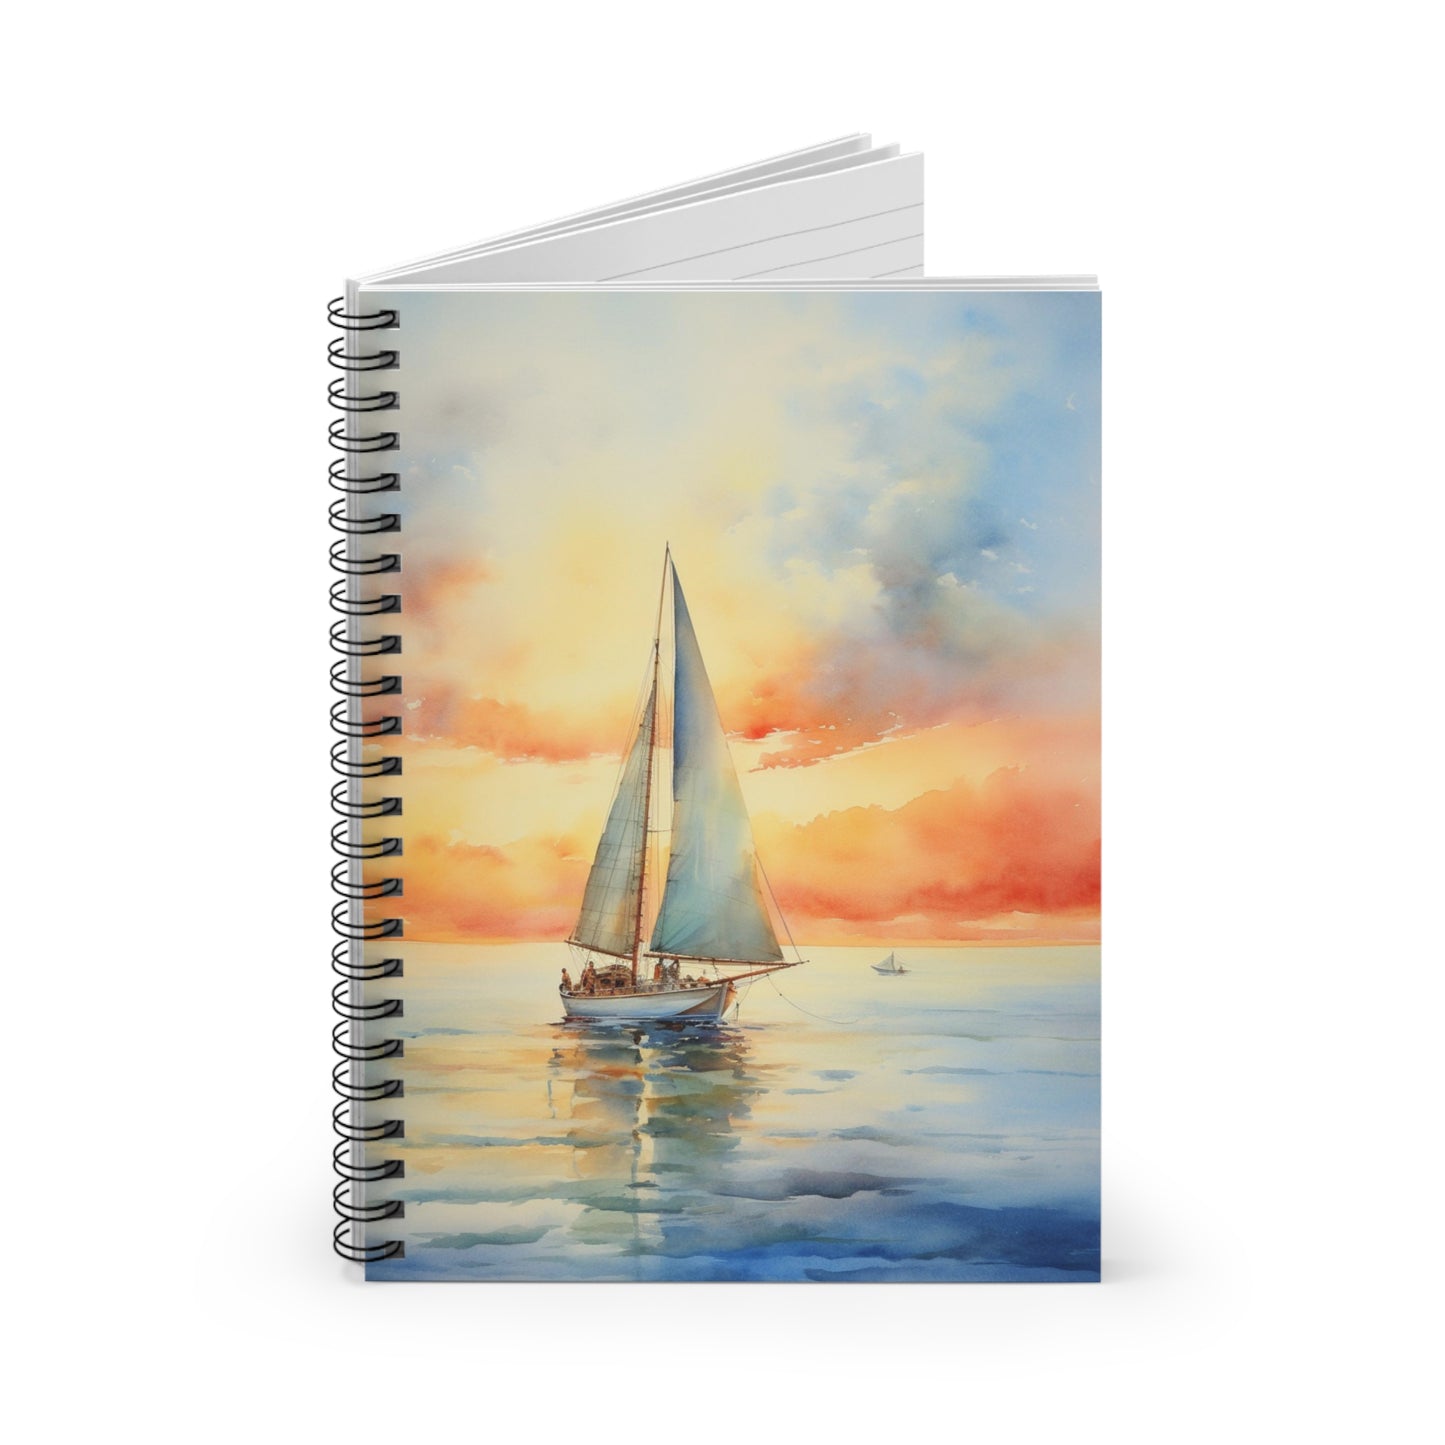 Sunset Sailing Spiral Notebook, Sail Boat Ocean Sea Travel Design Small Journal Notepad Ruled Line Book Paper Pad Work Aesthetic Gift